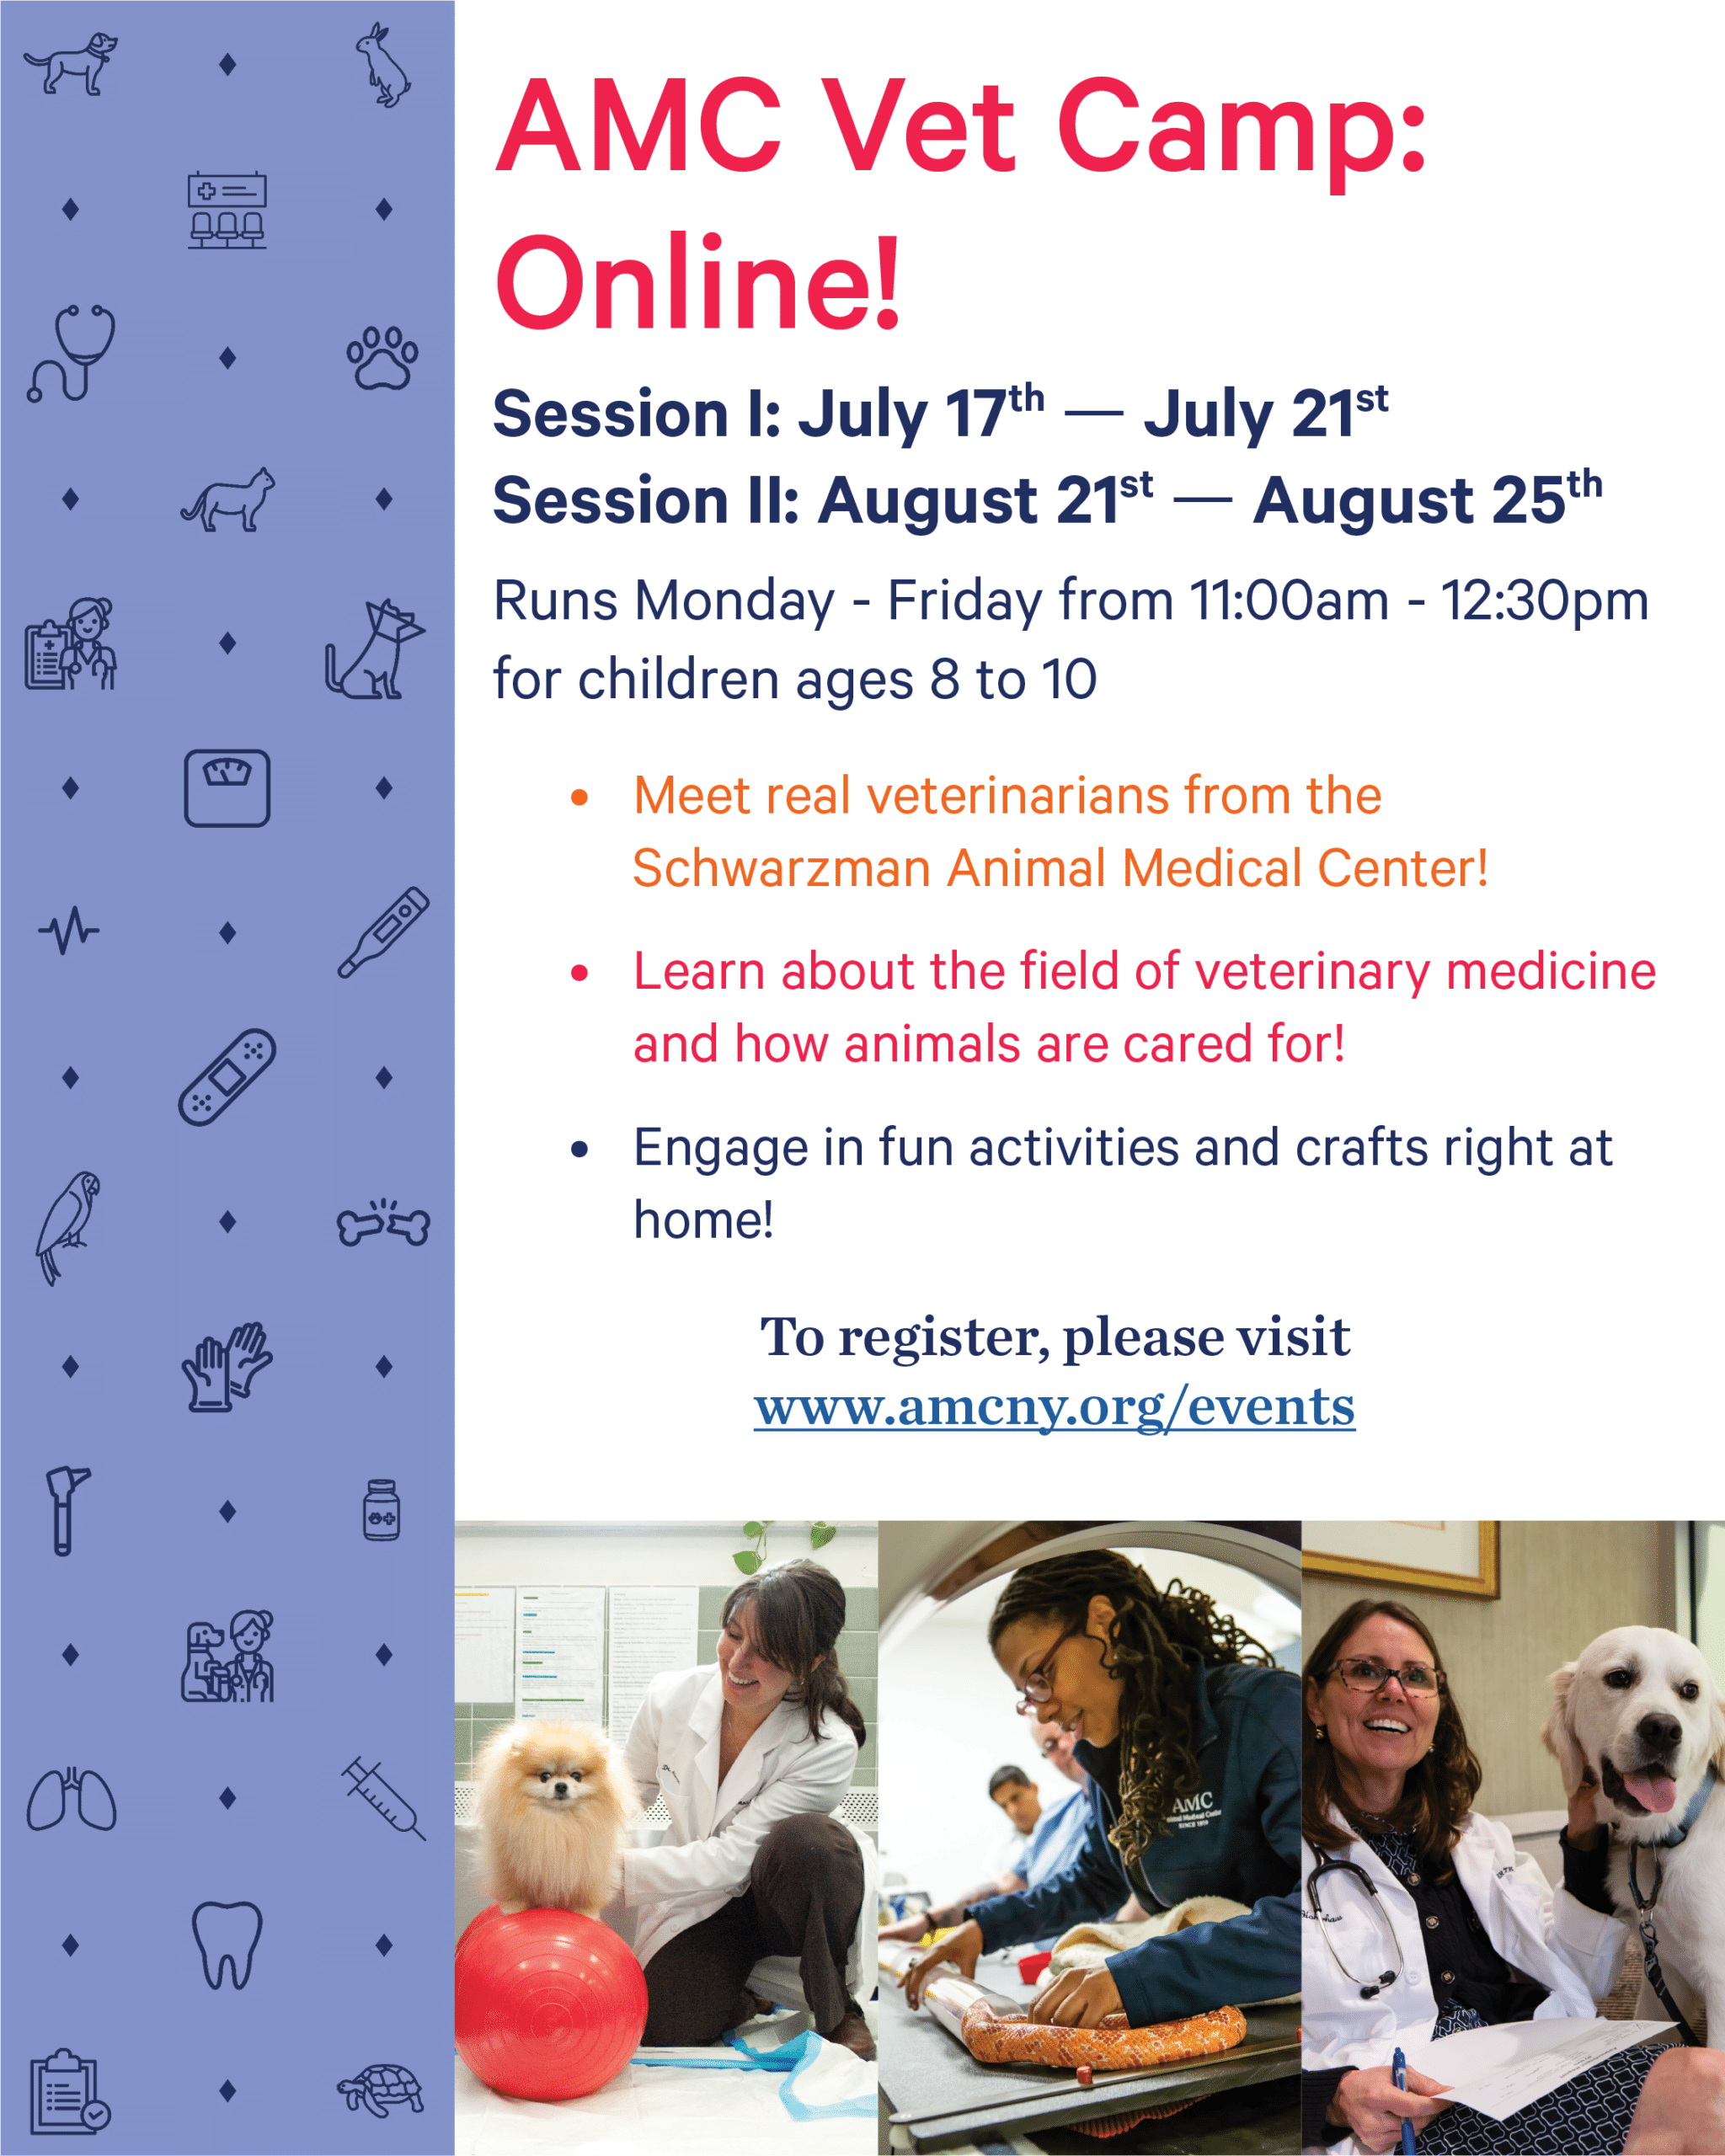 AMC Vet Camp: Online! Session 1: July 17th to July 21st. Session 2: August 21st to August 25th. Runs Monday through Friday from 11:00am to 12:30pm for children ages 8 to 10. Meet real veterinarians from the Schwarzman Animal Medical Center! Learn about the field of veterinary medicine and how animals are cared for! Engage in fun activities and crafts right at home! To register, please visit www.amcny.org/events